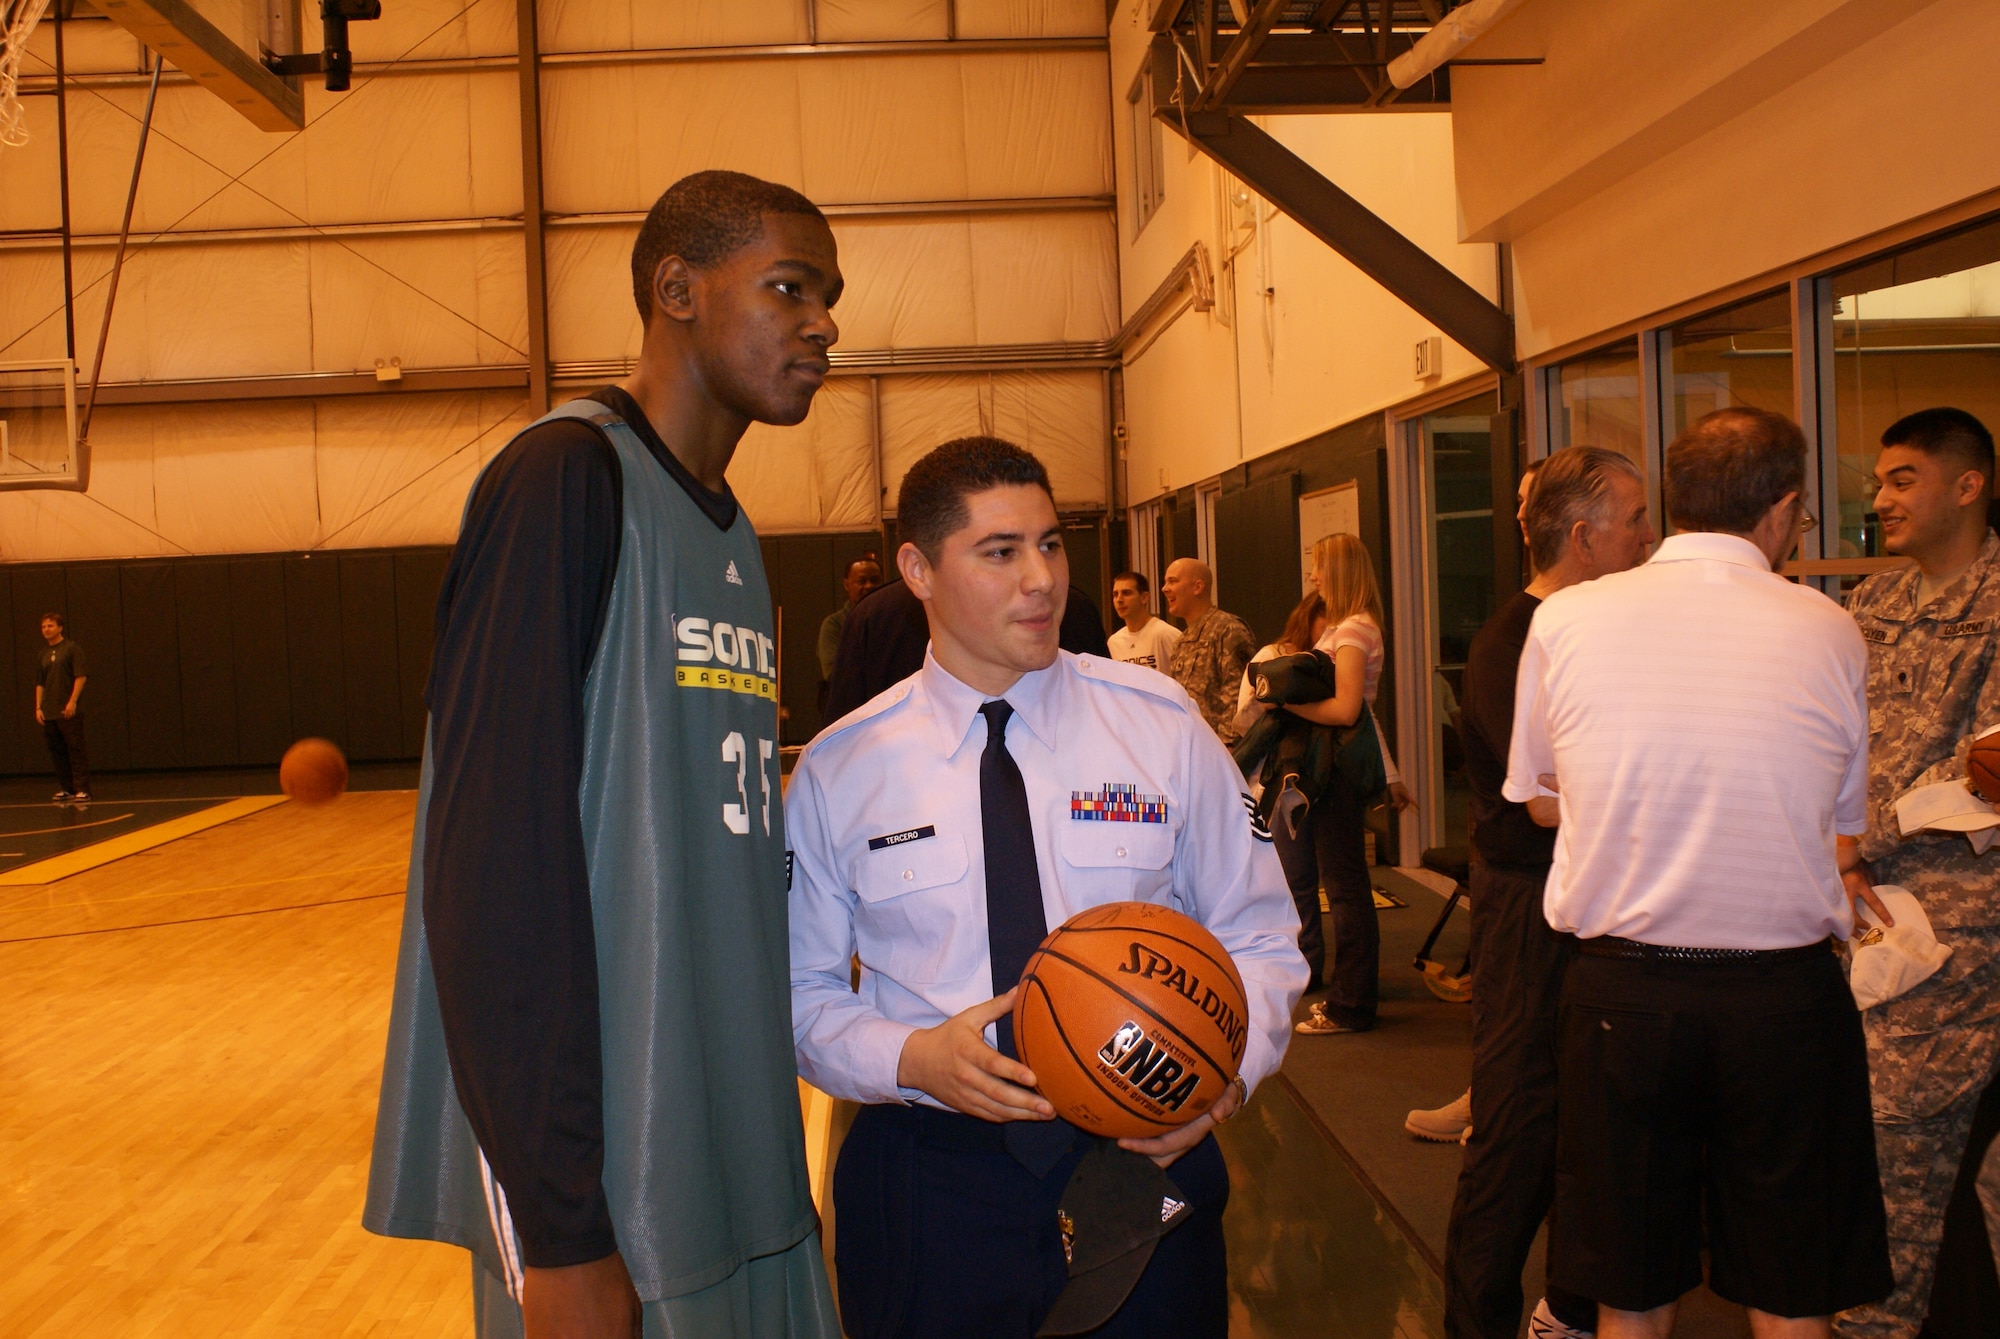 Staff Sgt. Daniel Tercero, 22nd Special Tactics Squadron, poses for a picture
with Sonics rookie Kevin Durant.